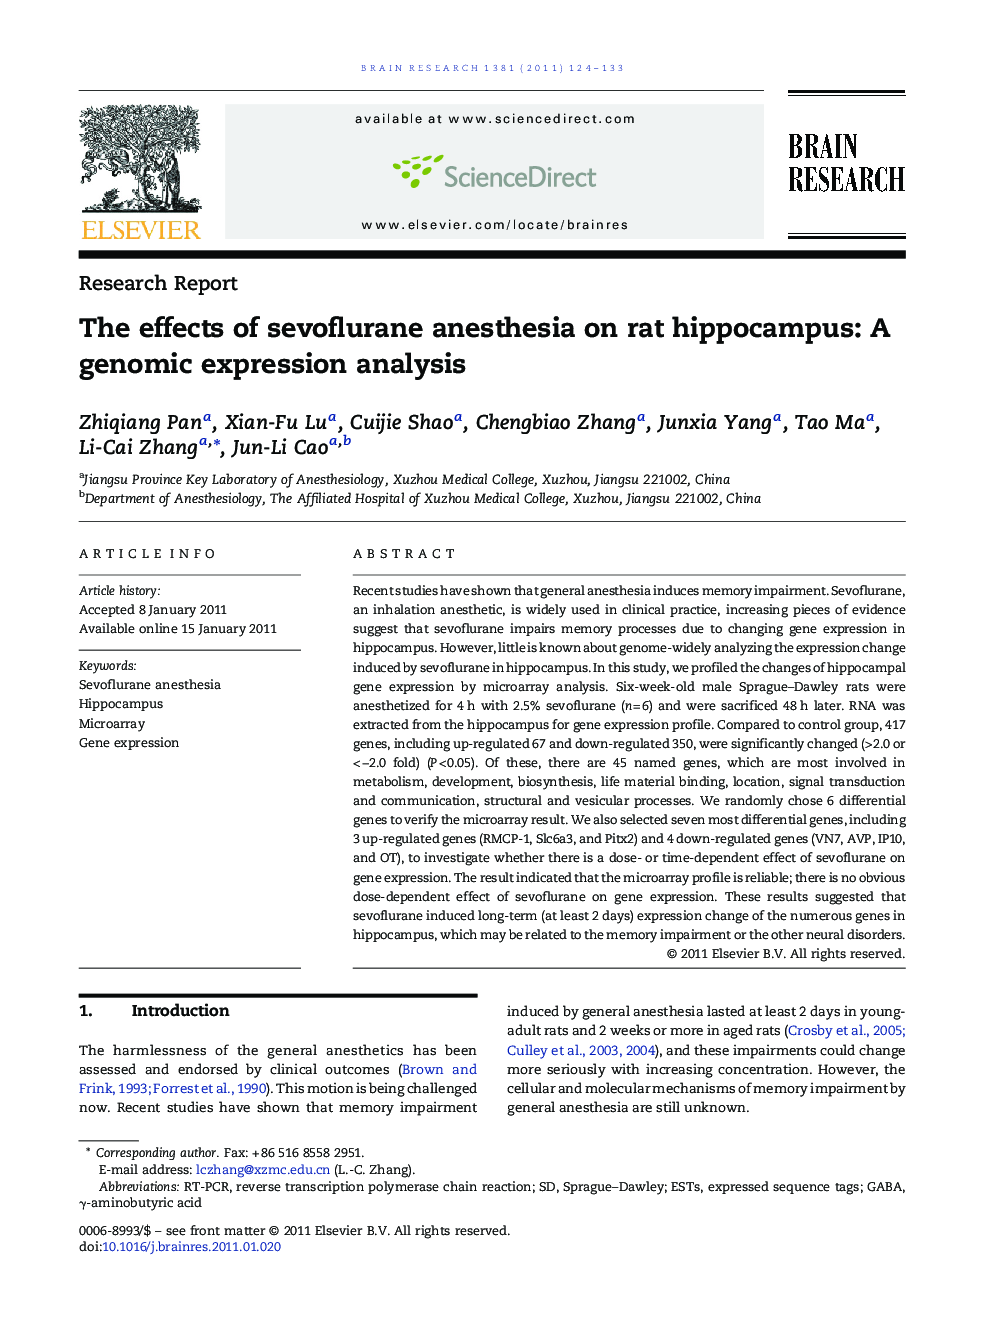 The effects of sevoflurane anesthesia on rat hippocampus: A genomic expression analysis